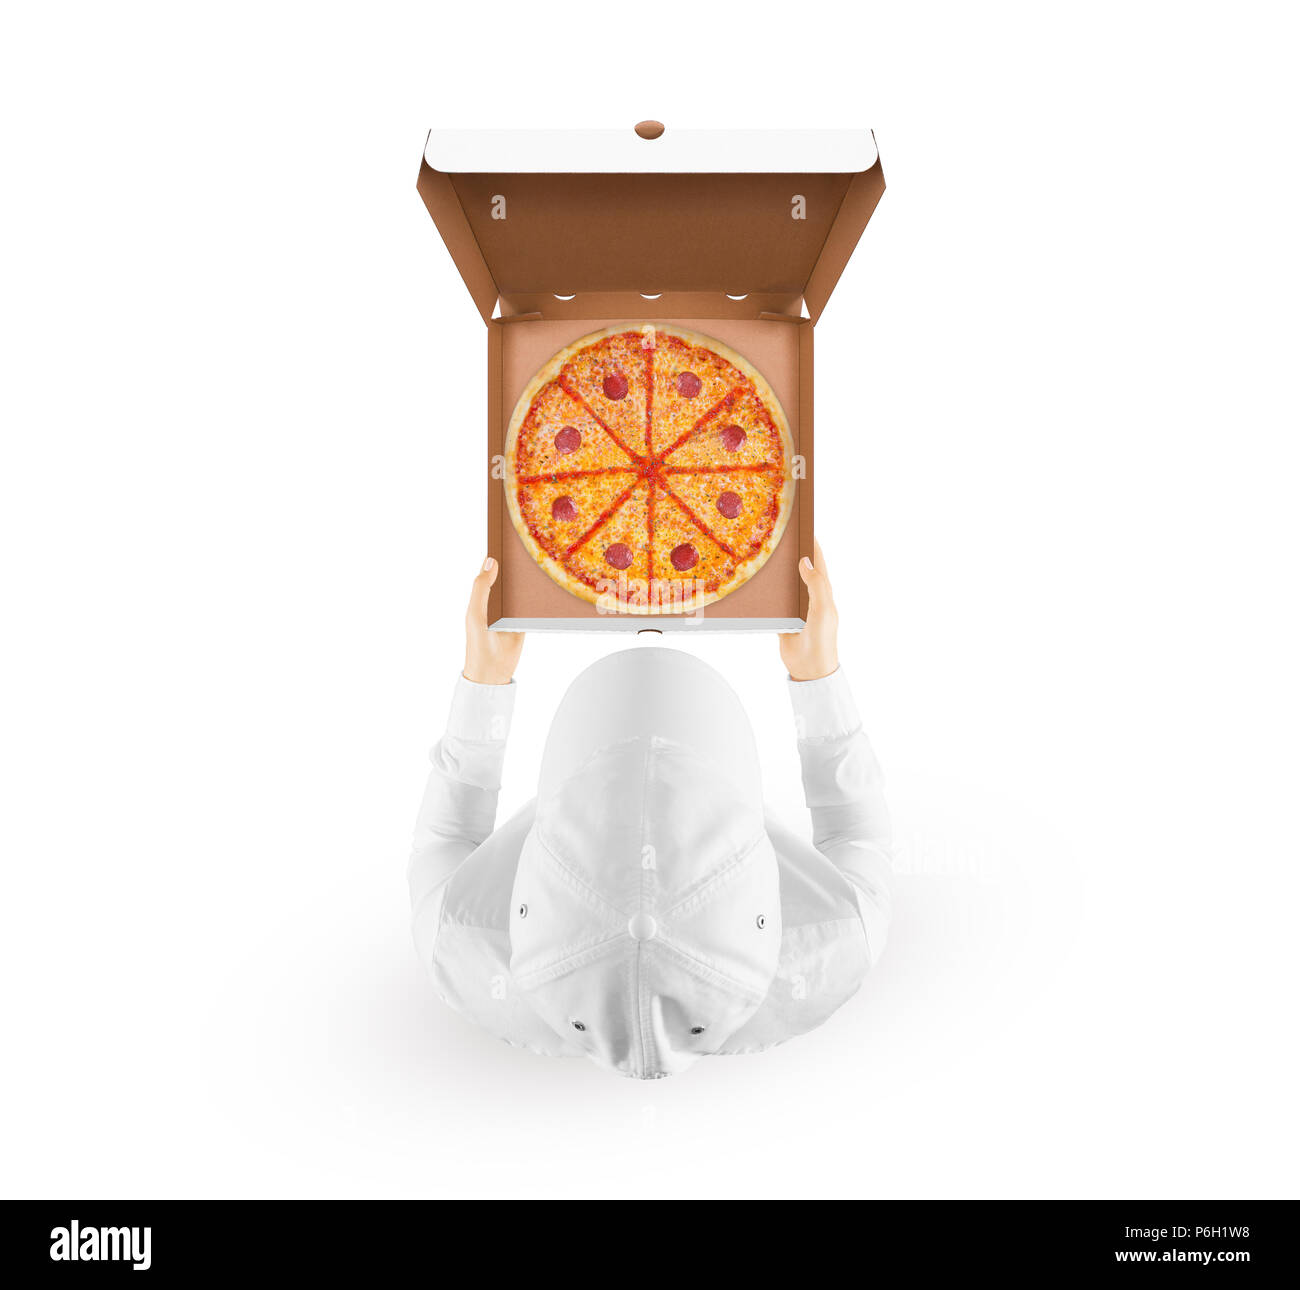 Delivery man holding pizza box mockup with tasty pizza in hand isolated on white, top view. Deliver guy in clear uniform hold opened box mock up. Food packaging template. Pizzeria identity branding Stock Photo